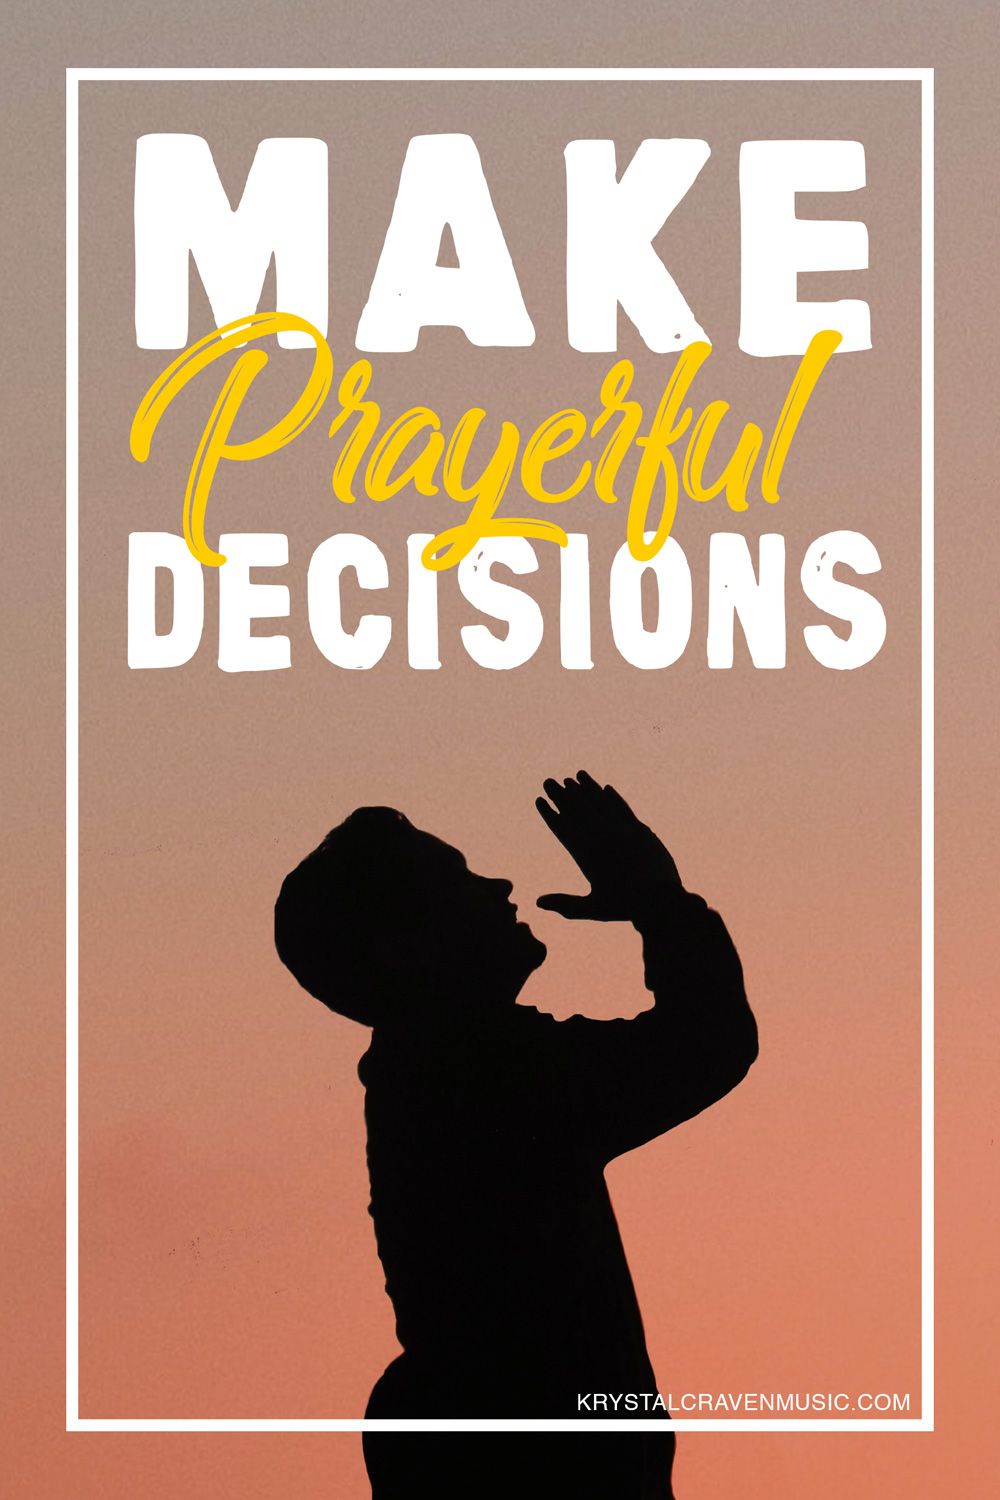 The devotional title text overlaying the silhouette of a person's side profile as they hold their hands up near their face in a praying stance. The entire background is a peach gradient.